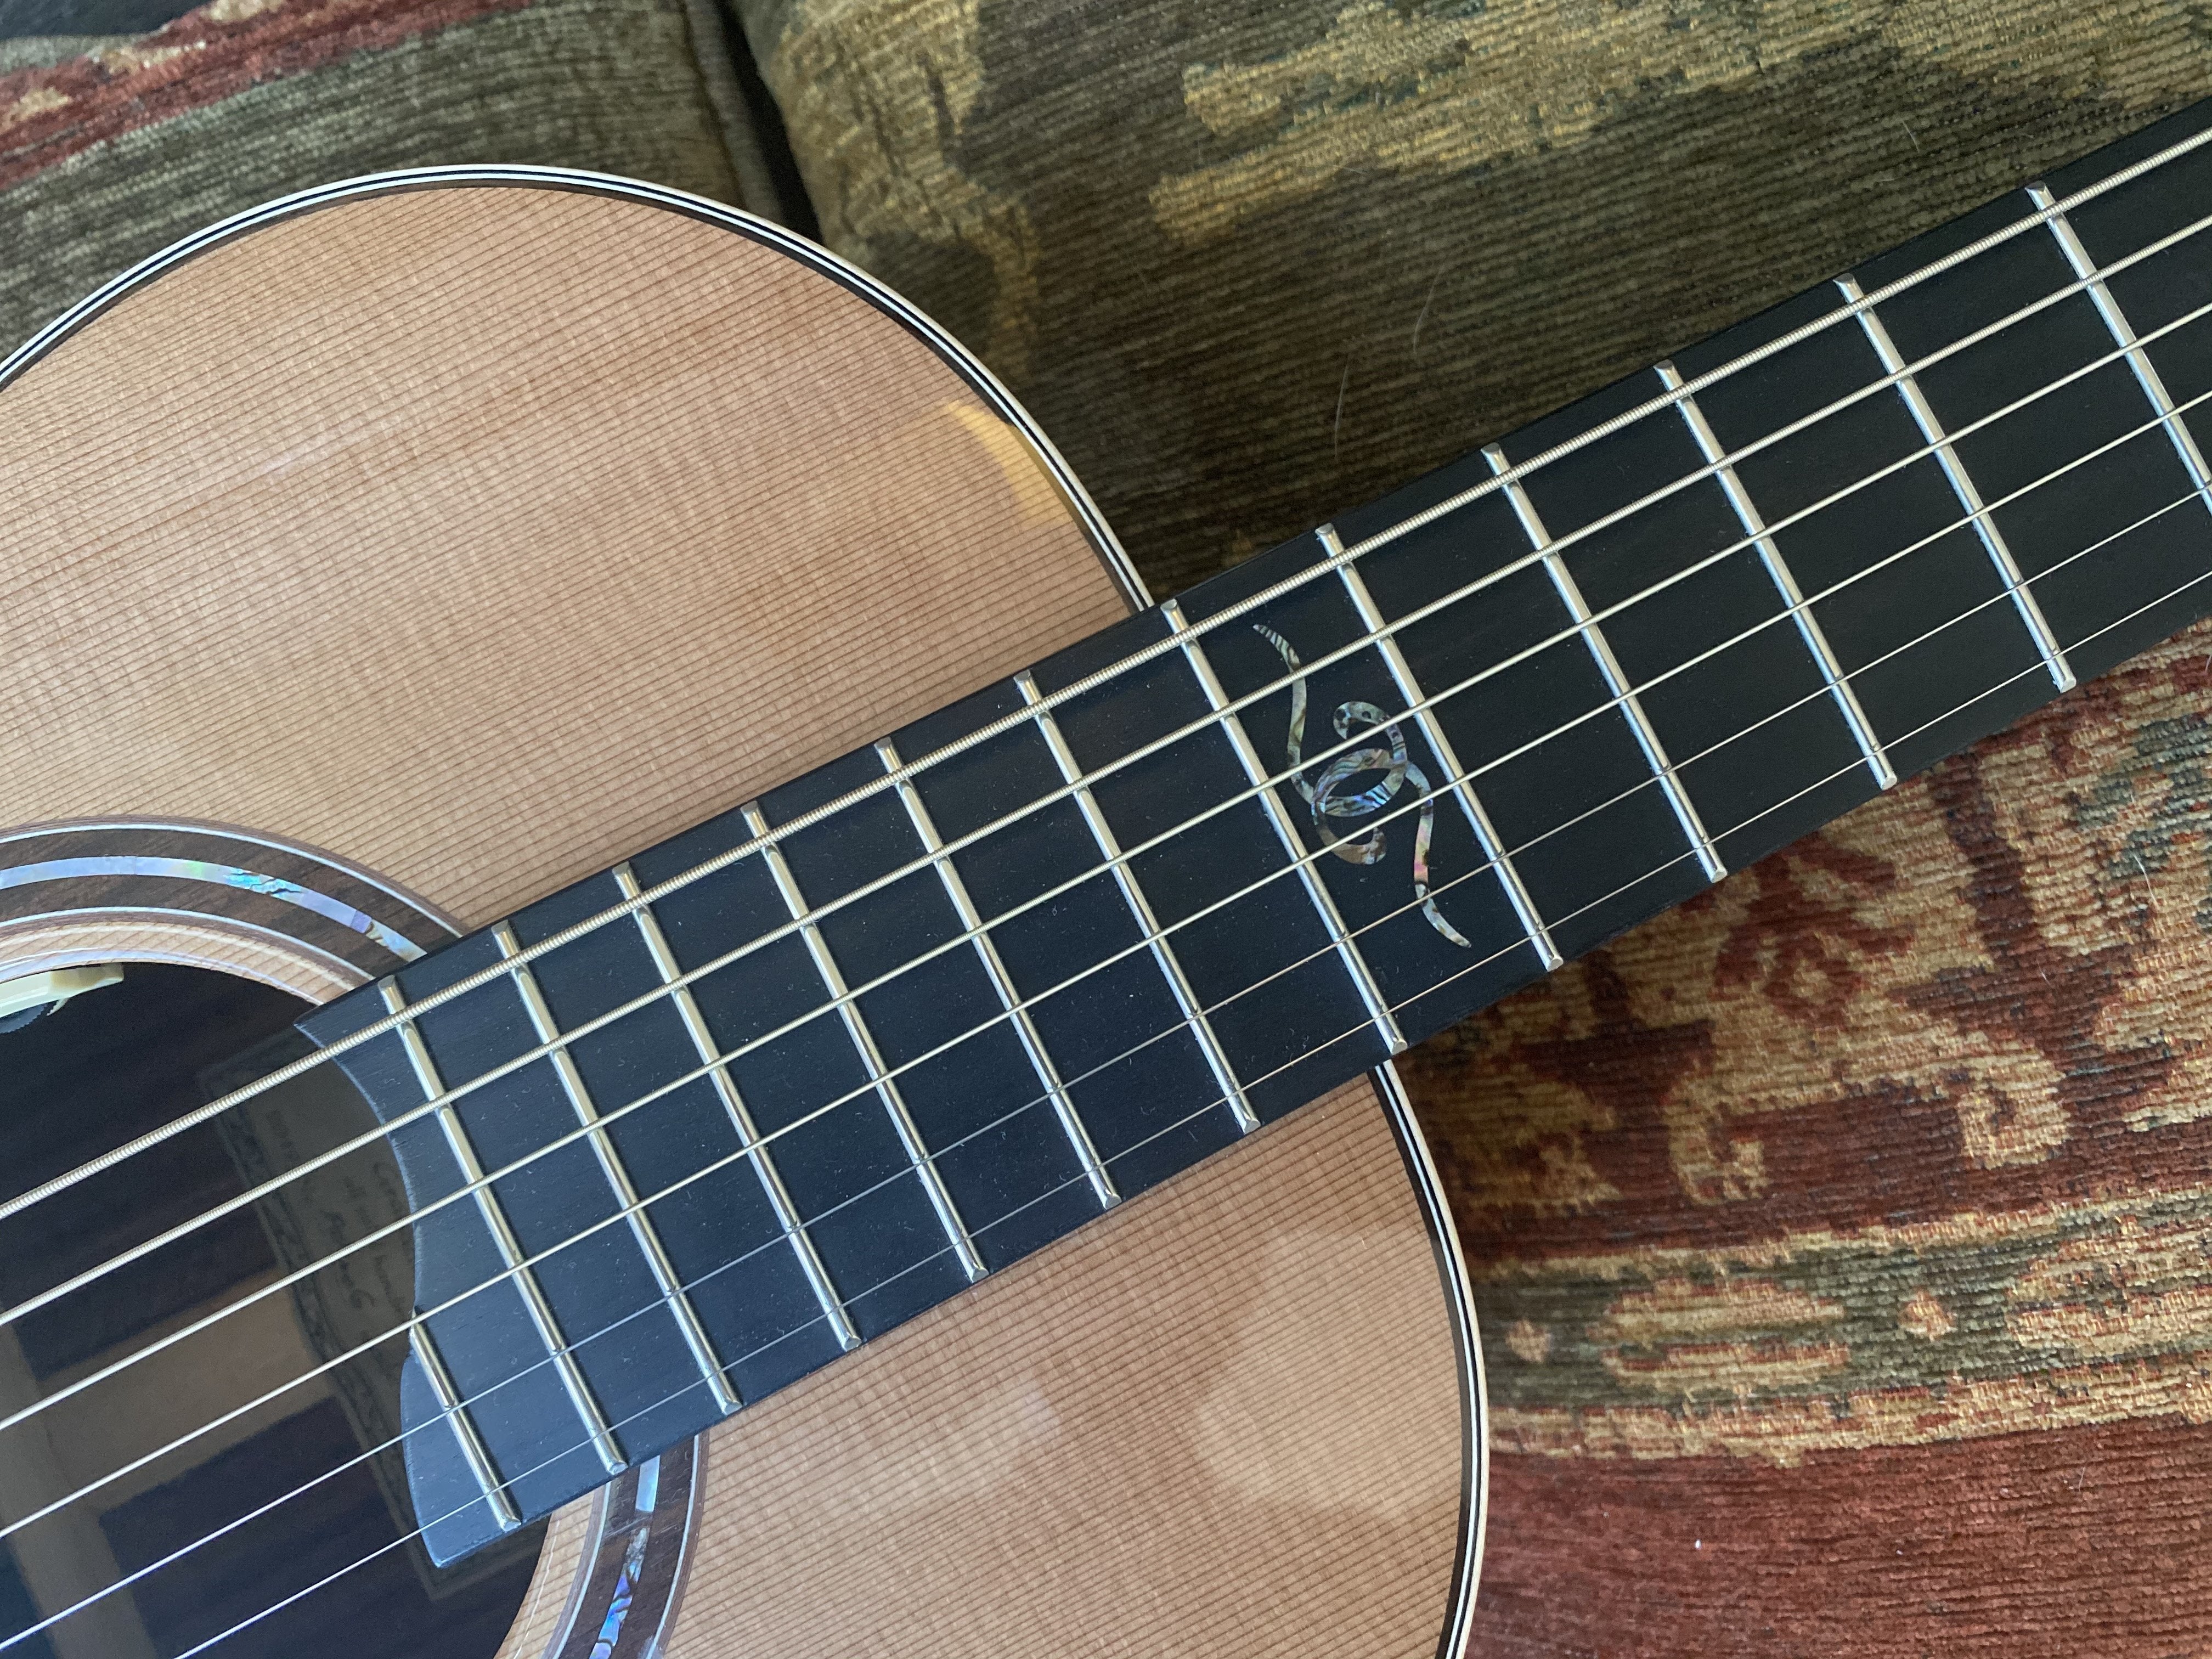 Dowina Granadillo BV Left Handed, Electro Acoustic Guitar for sale at Richards Guitars.